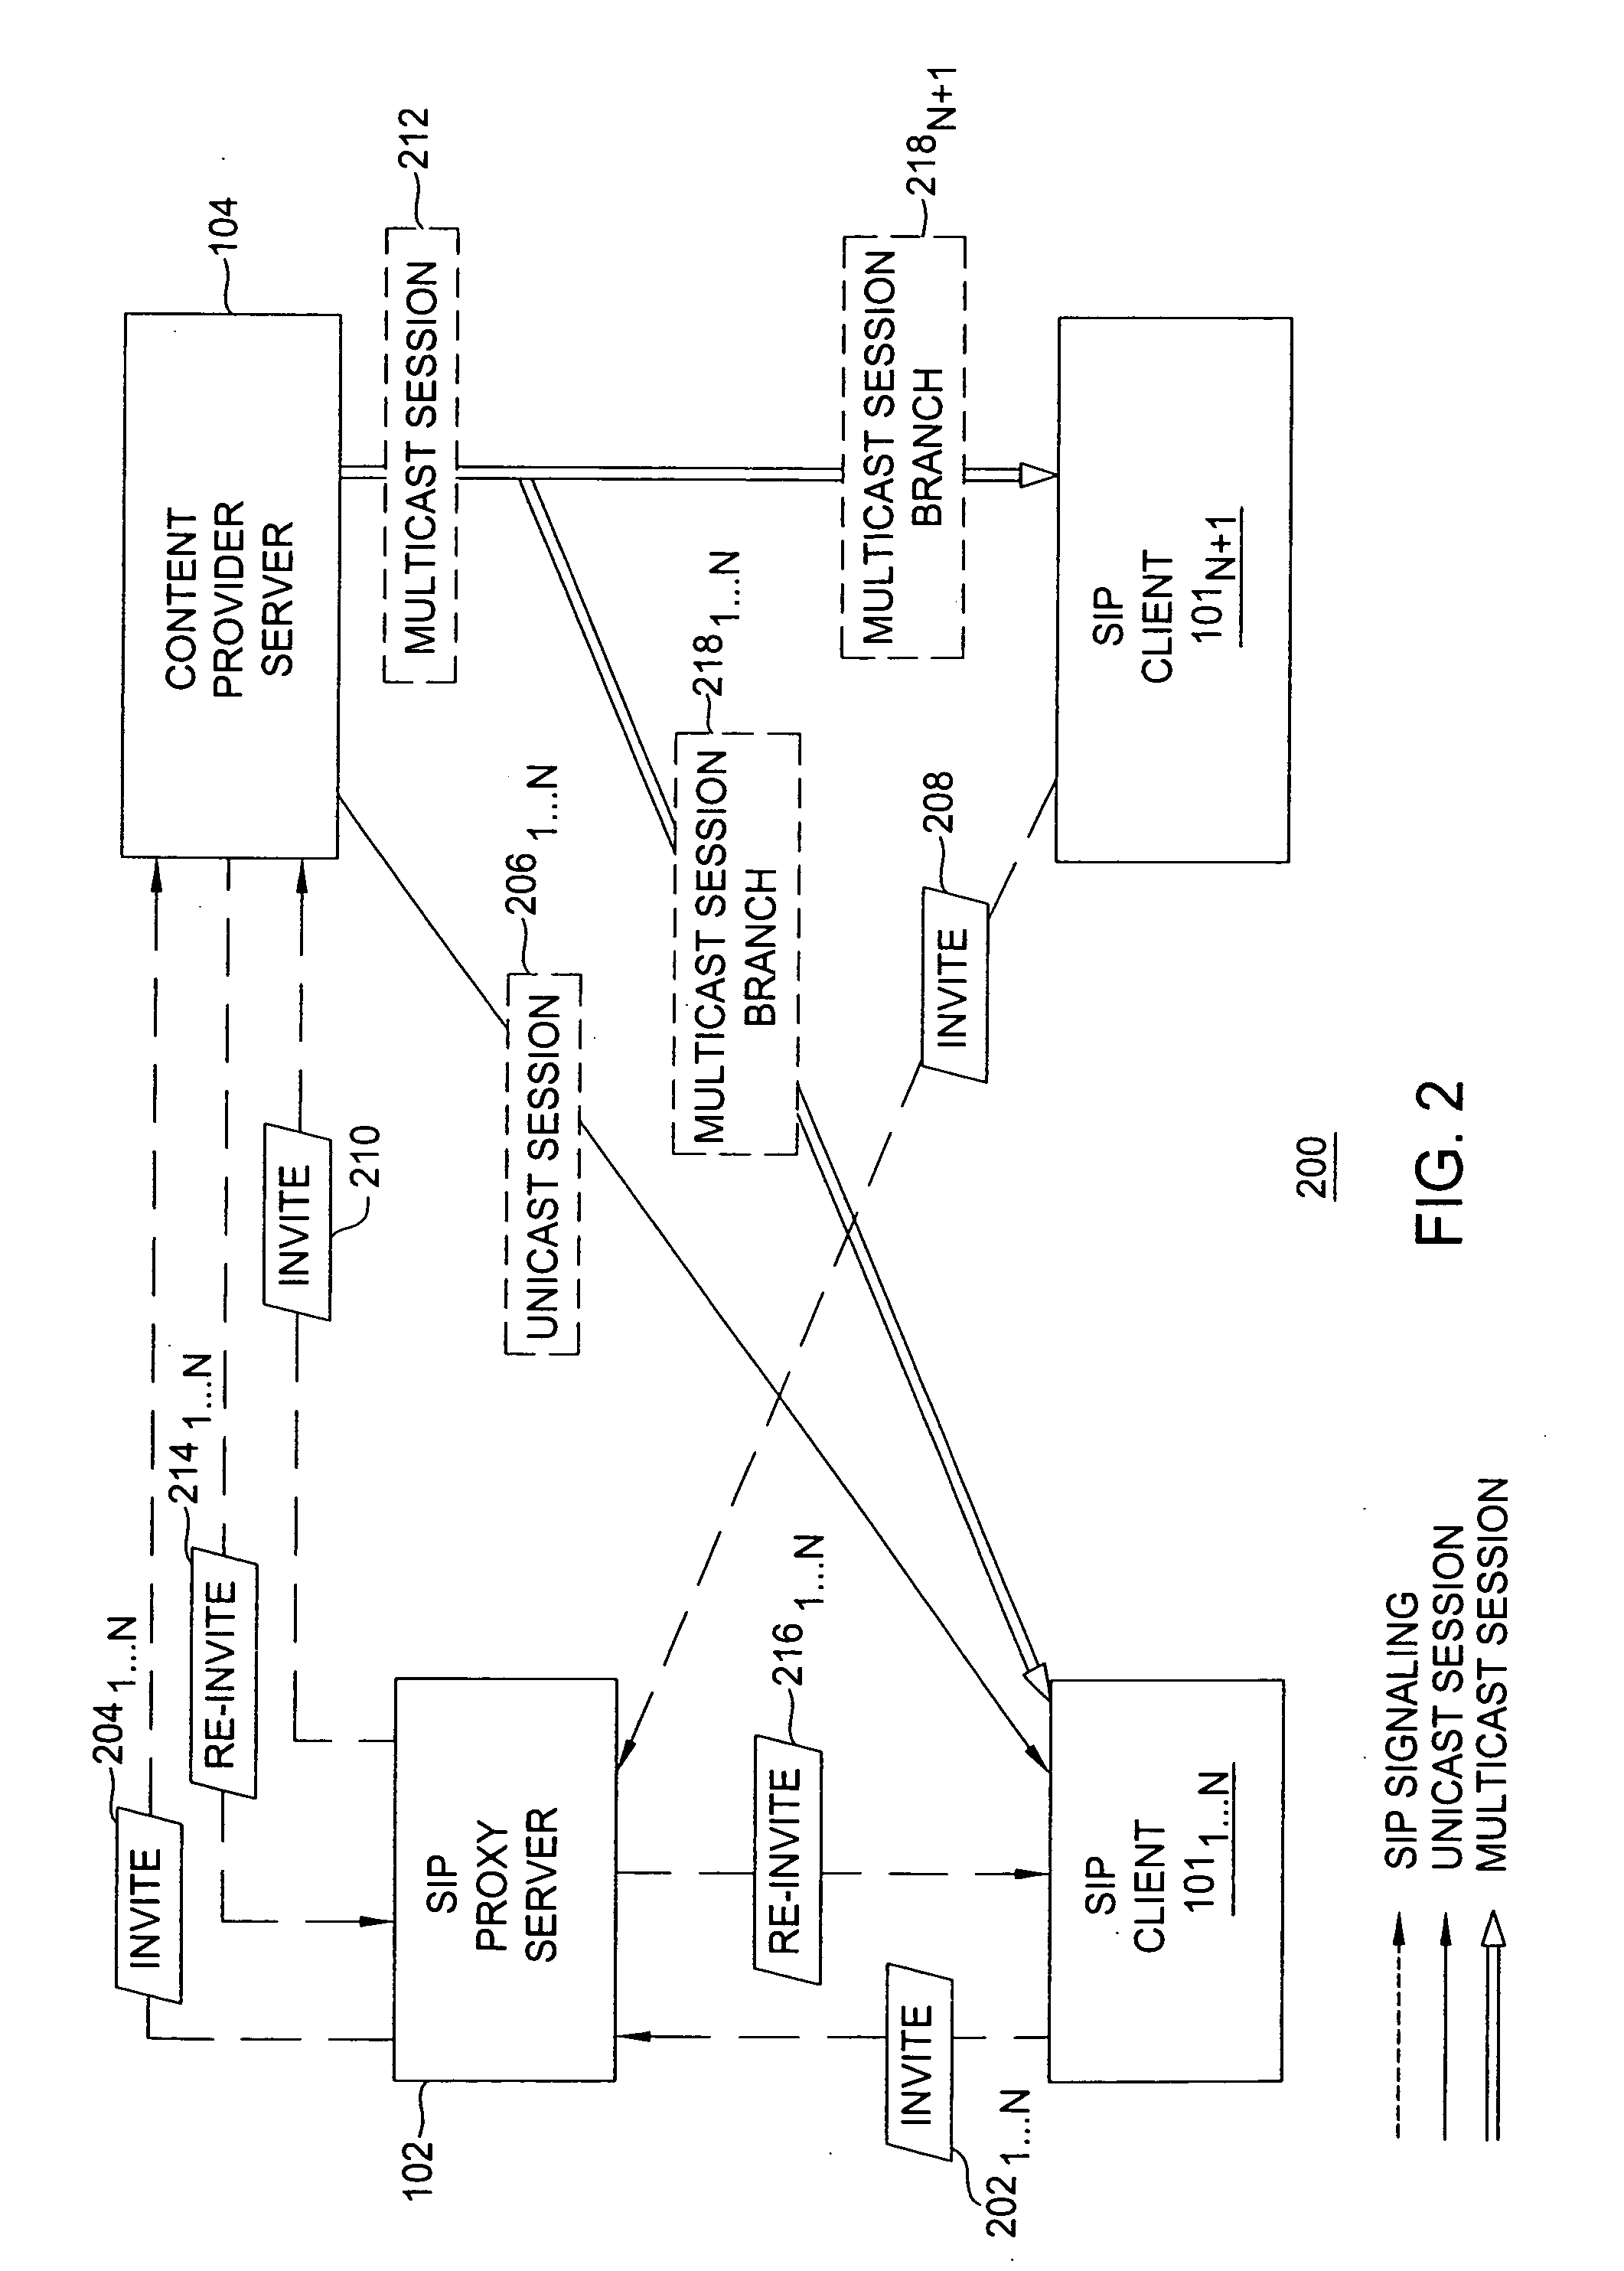 Method for converting between unicast sessions and a multicast session